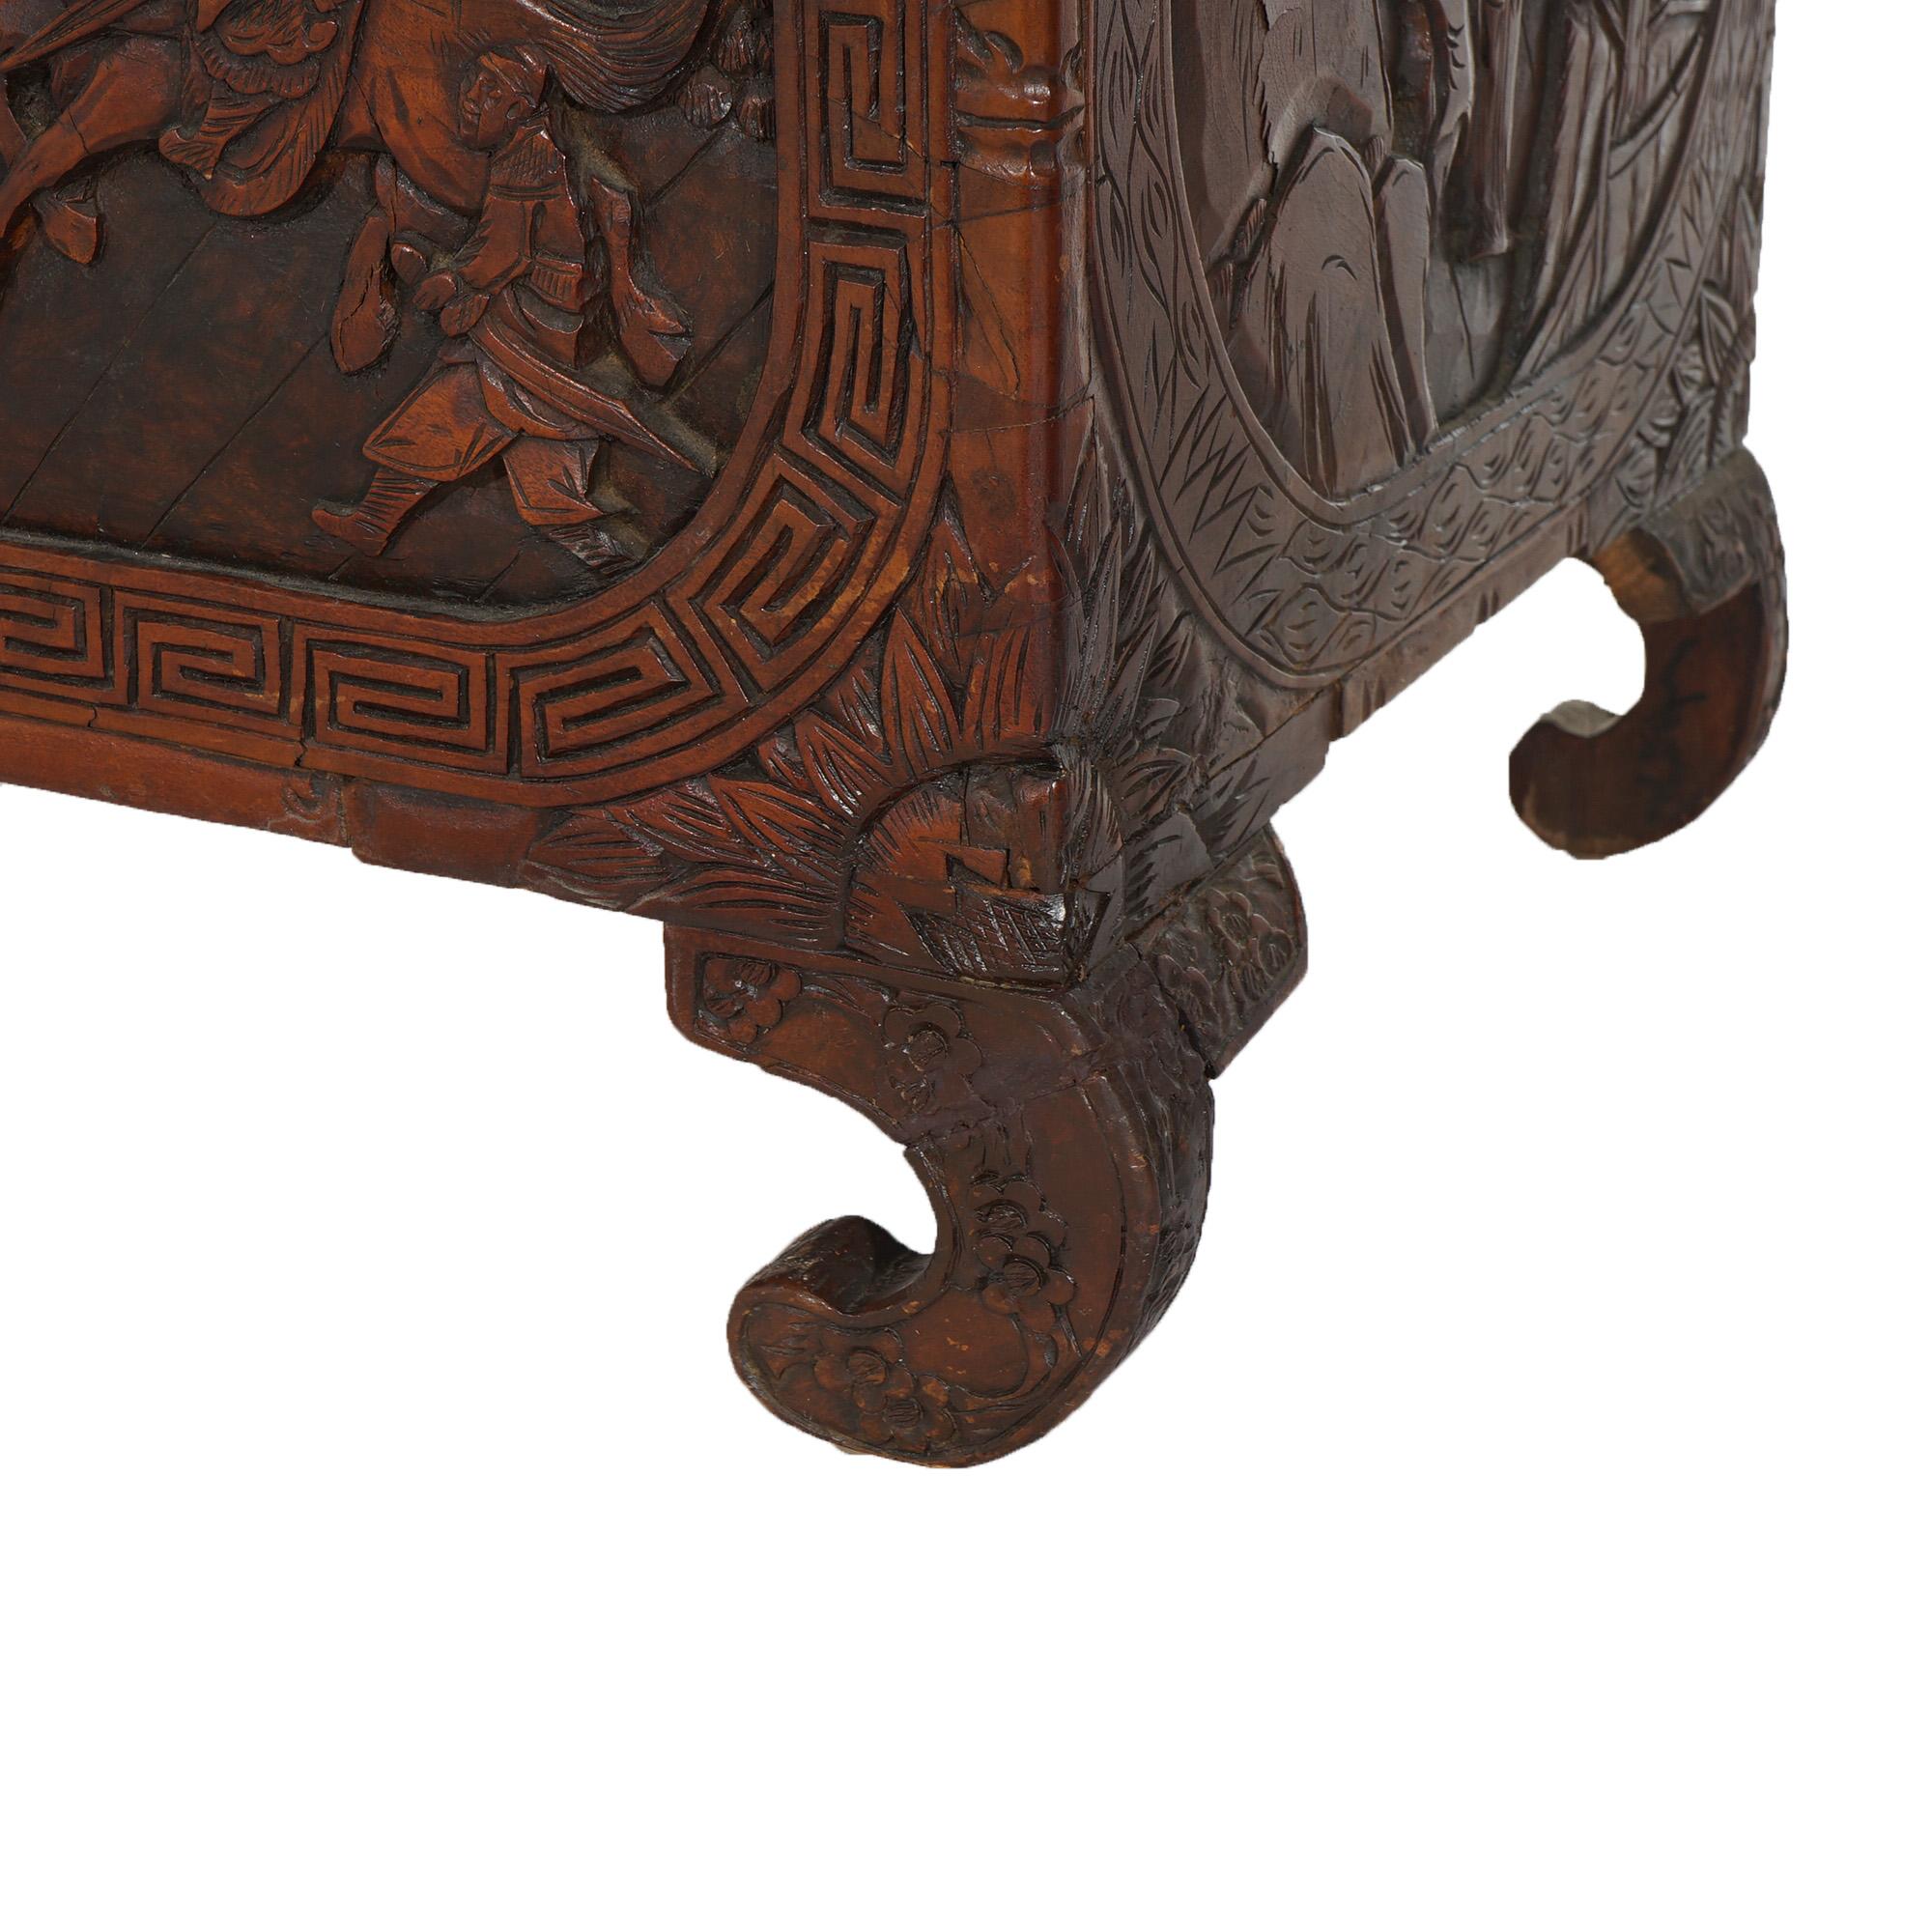 Antique Chinese Carved Hardwood Chest with Figures & Scenes in Relief with Stylized Scrolled Feet C1920

Measures - 24.25